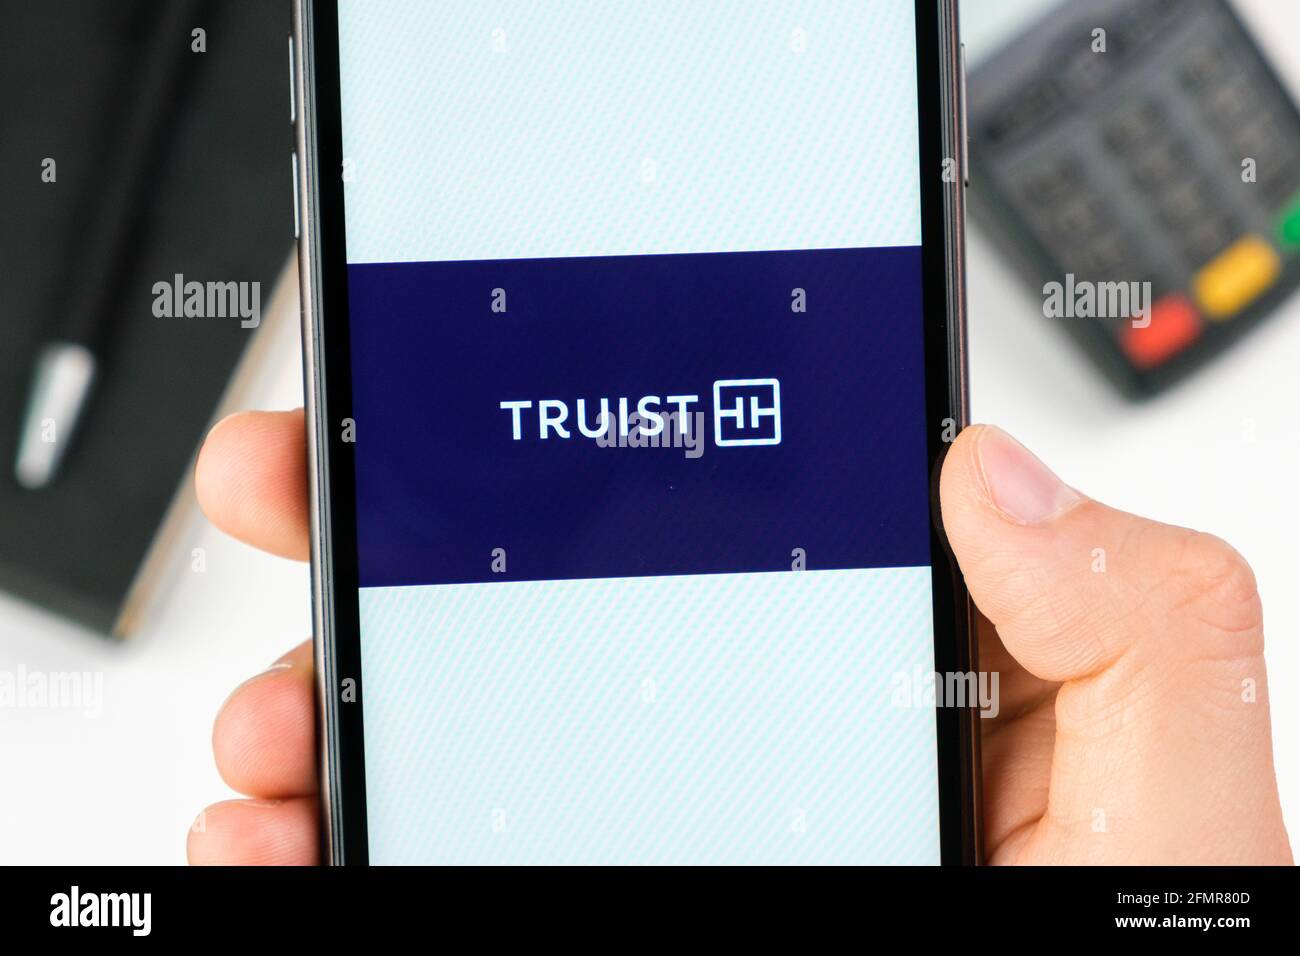 Truist bank logo on the smartphone screen in mans hand on the background of payment terminal, May 2021, San Francisco, USA Stock Photo